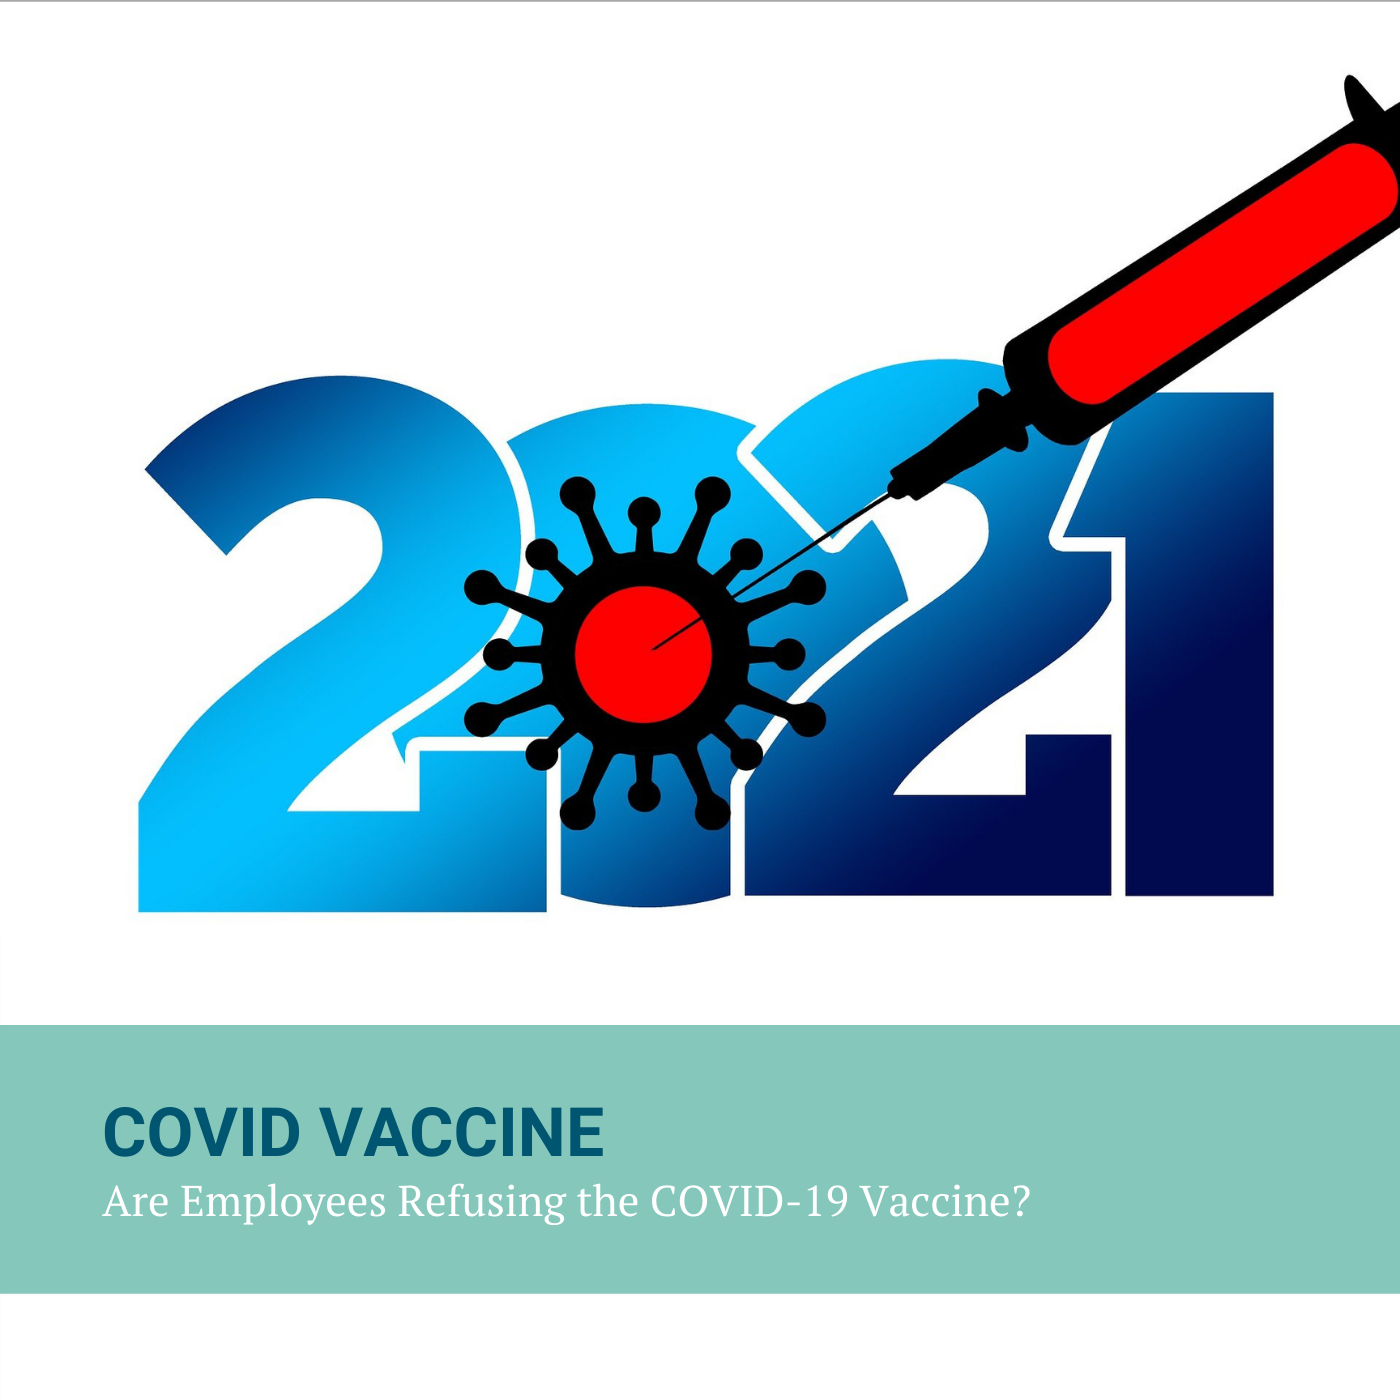 Are Employees Refusing the COVID-19 Vaccine? Image